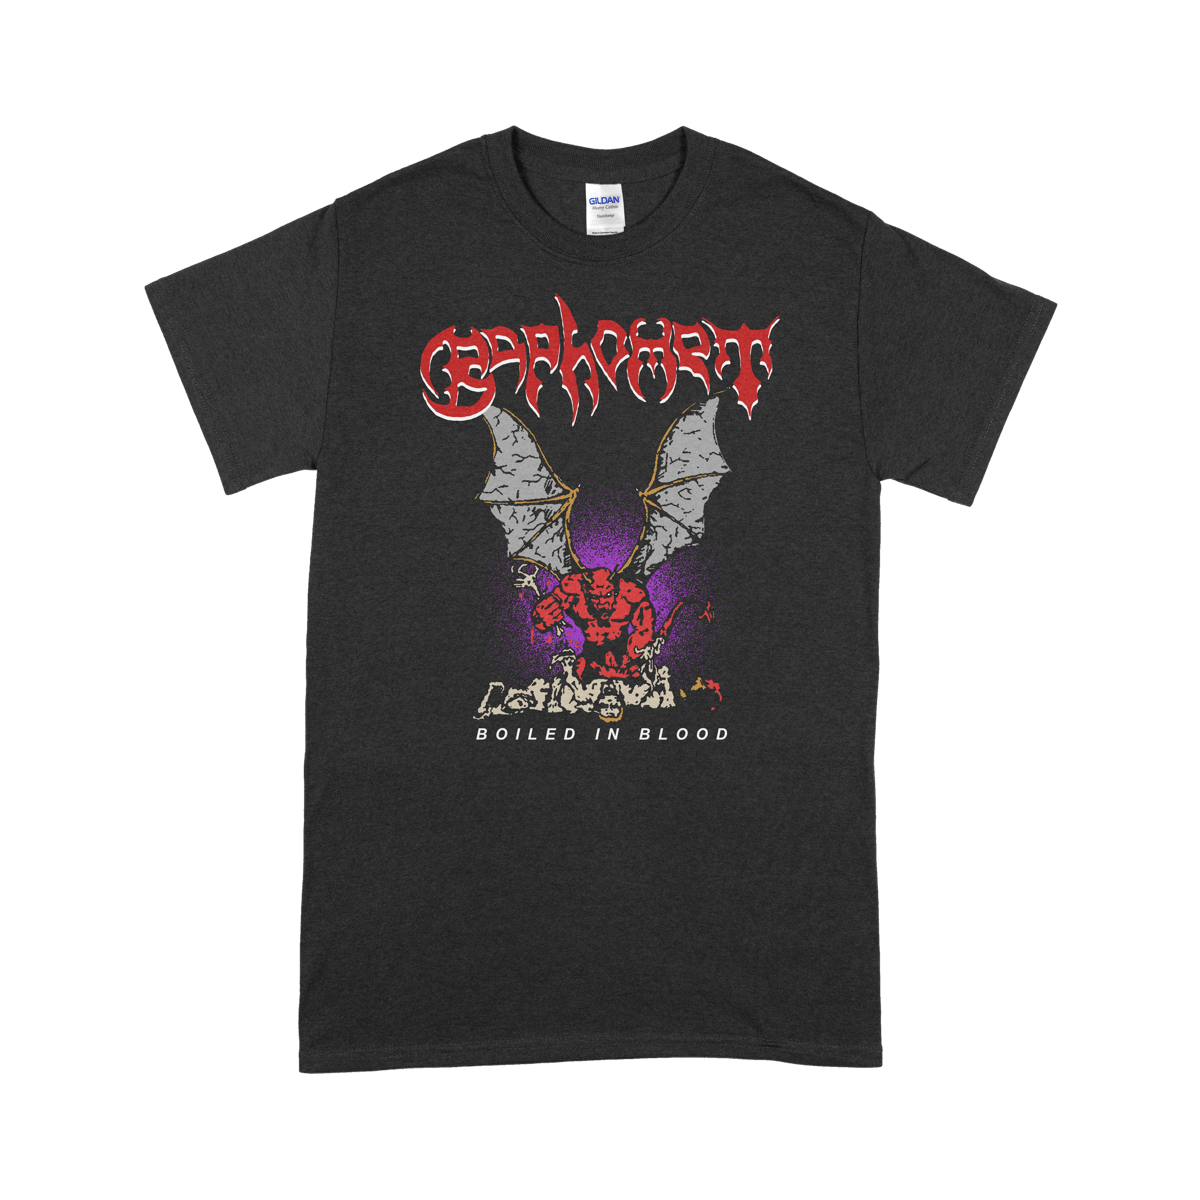 BAPHOMET BOILED IN BLOOD | unseenchaosshop